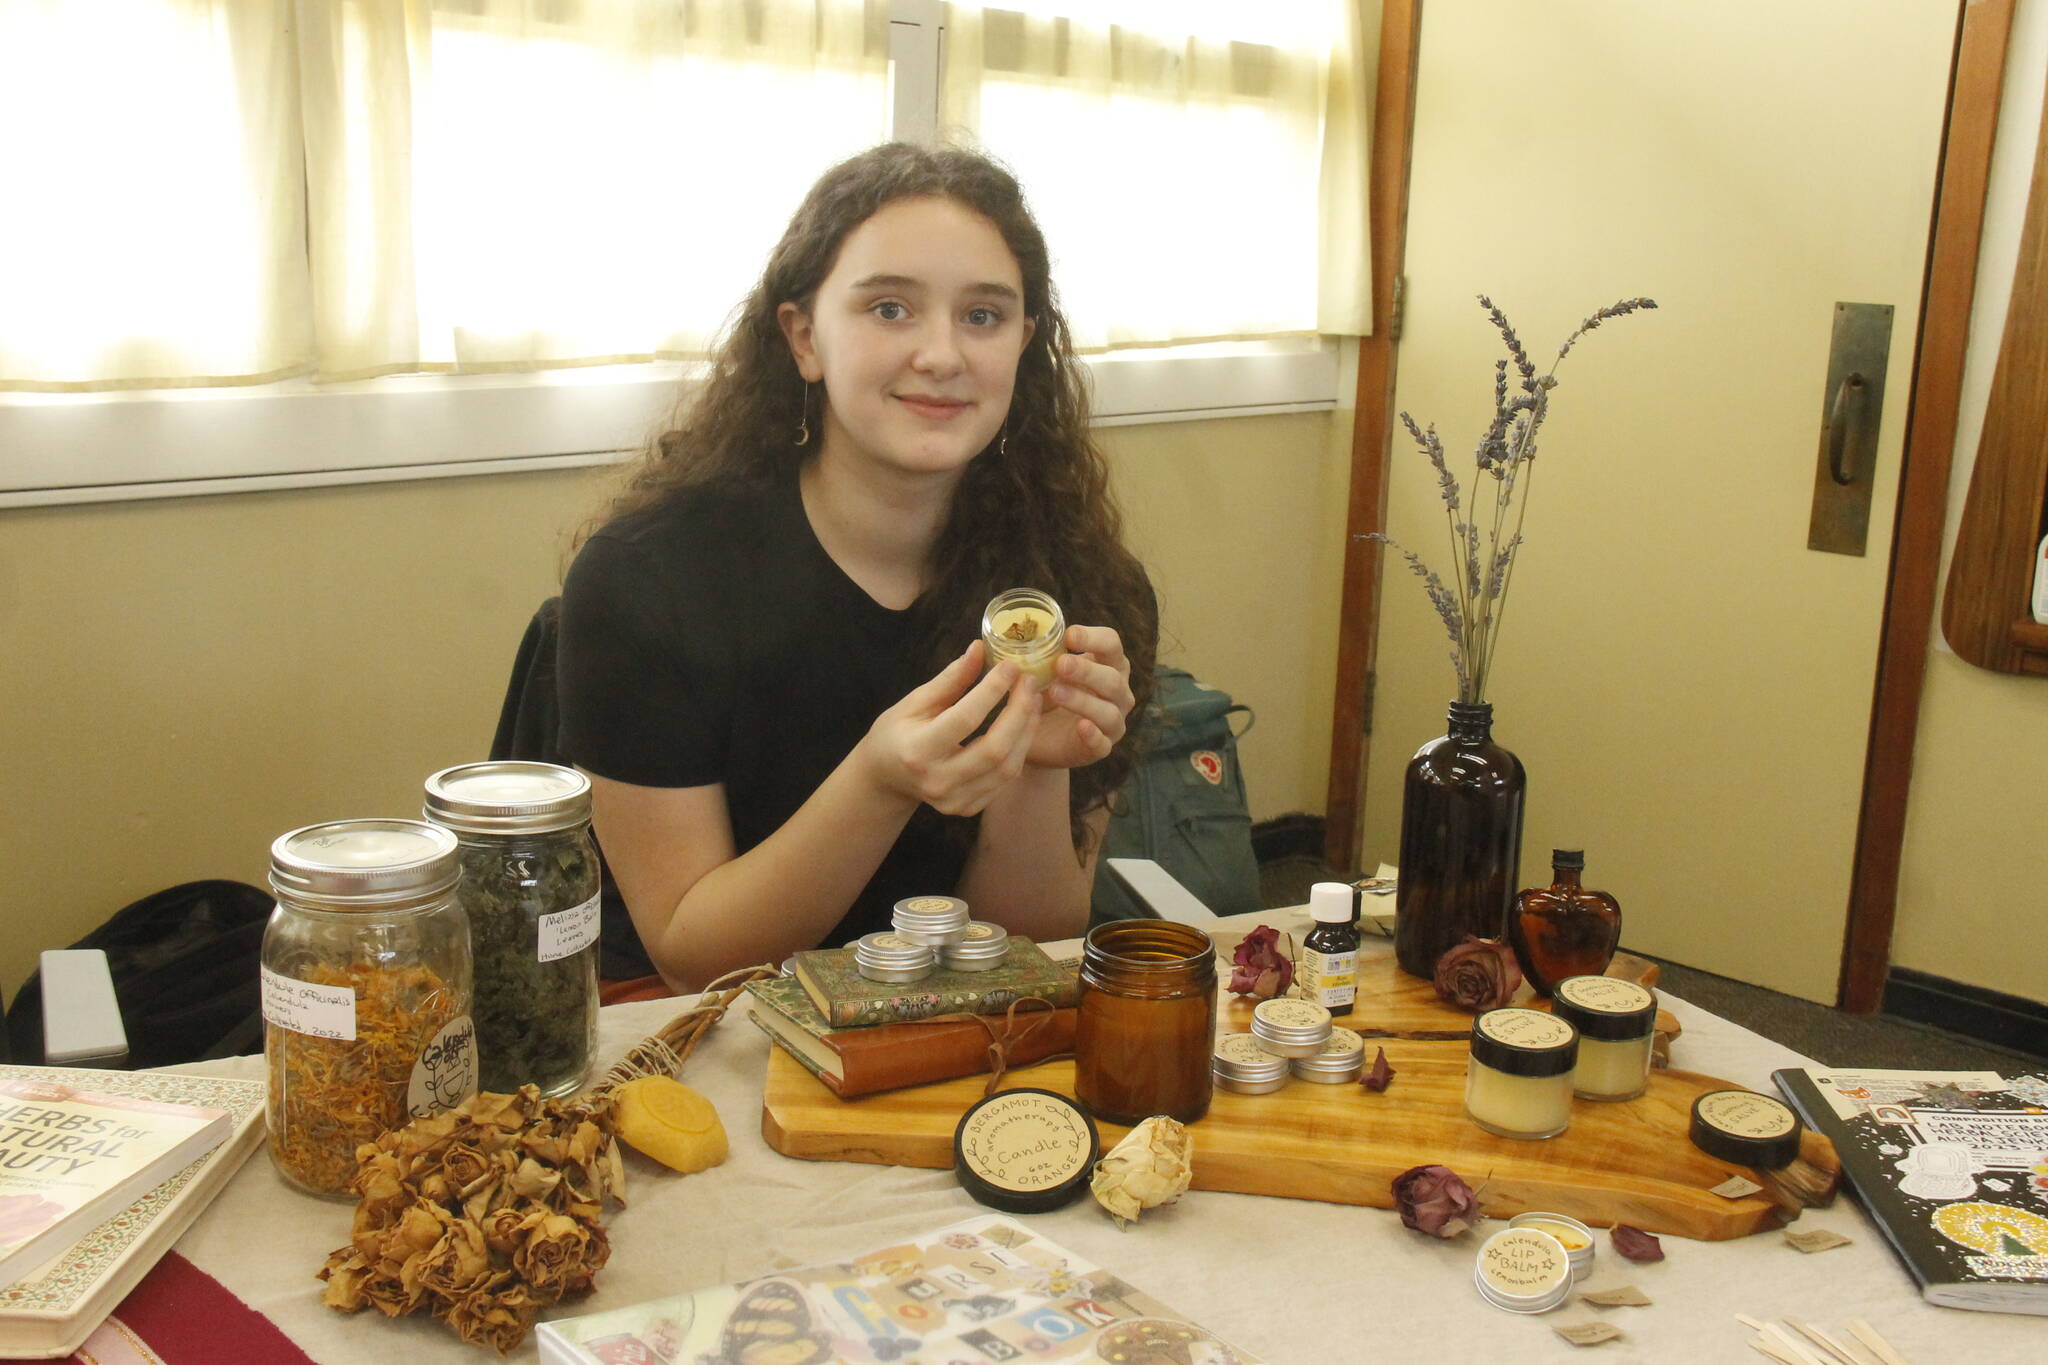 Tenth grader Alicia Jenkins made lemon balm lip balm, a salve for minor abrasions and a candle of orange and bergamot. (Photo by Kira Erickson/South Whidbey Record)